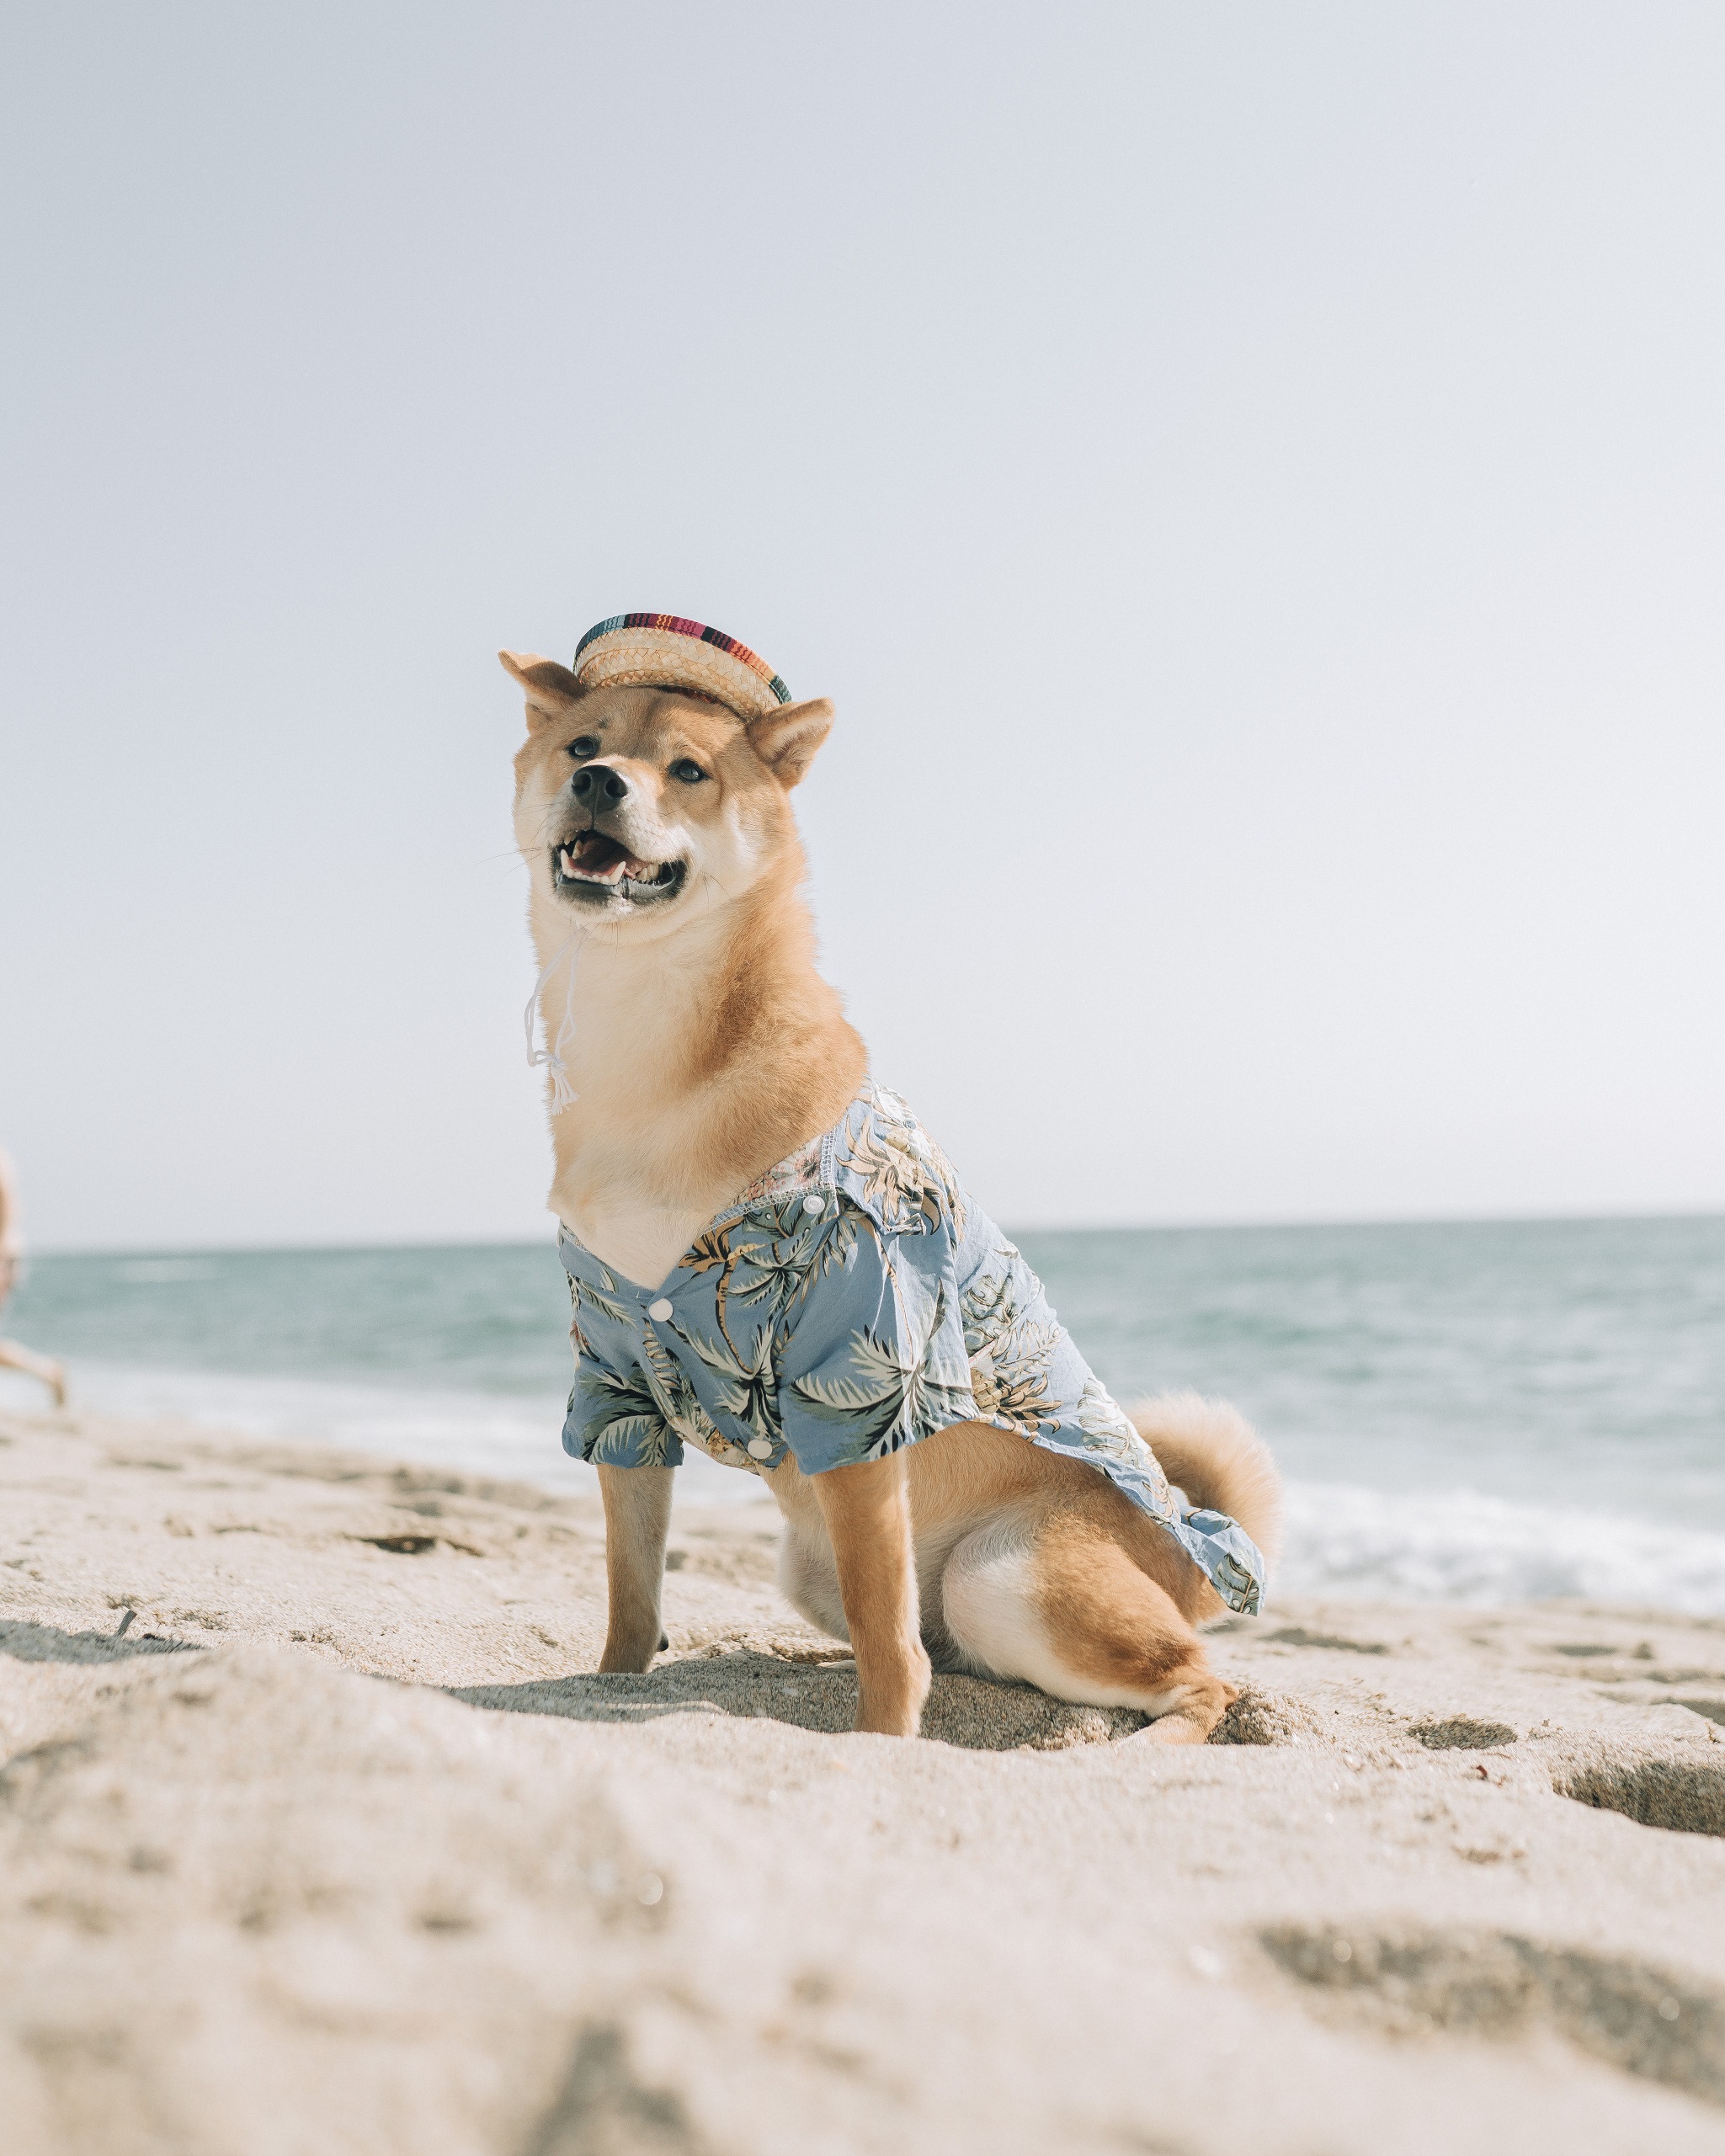 Doge at the beach, for DogeCoin